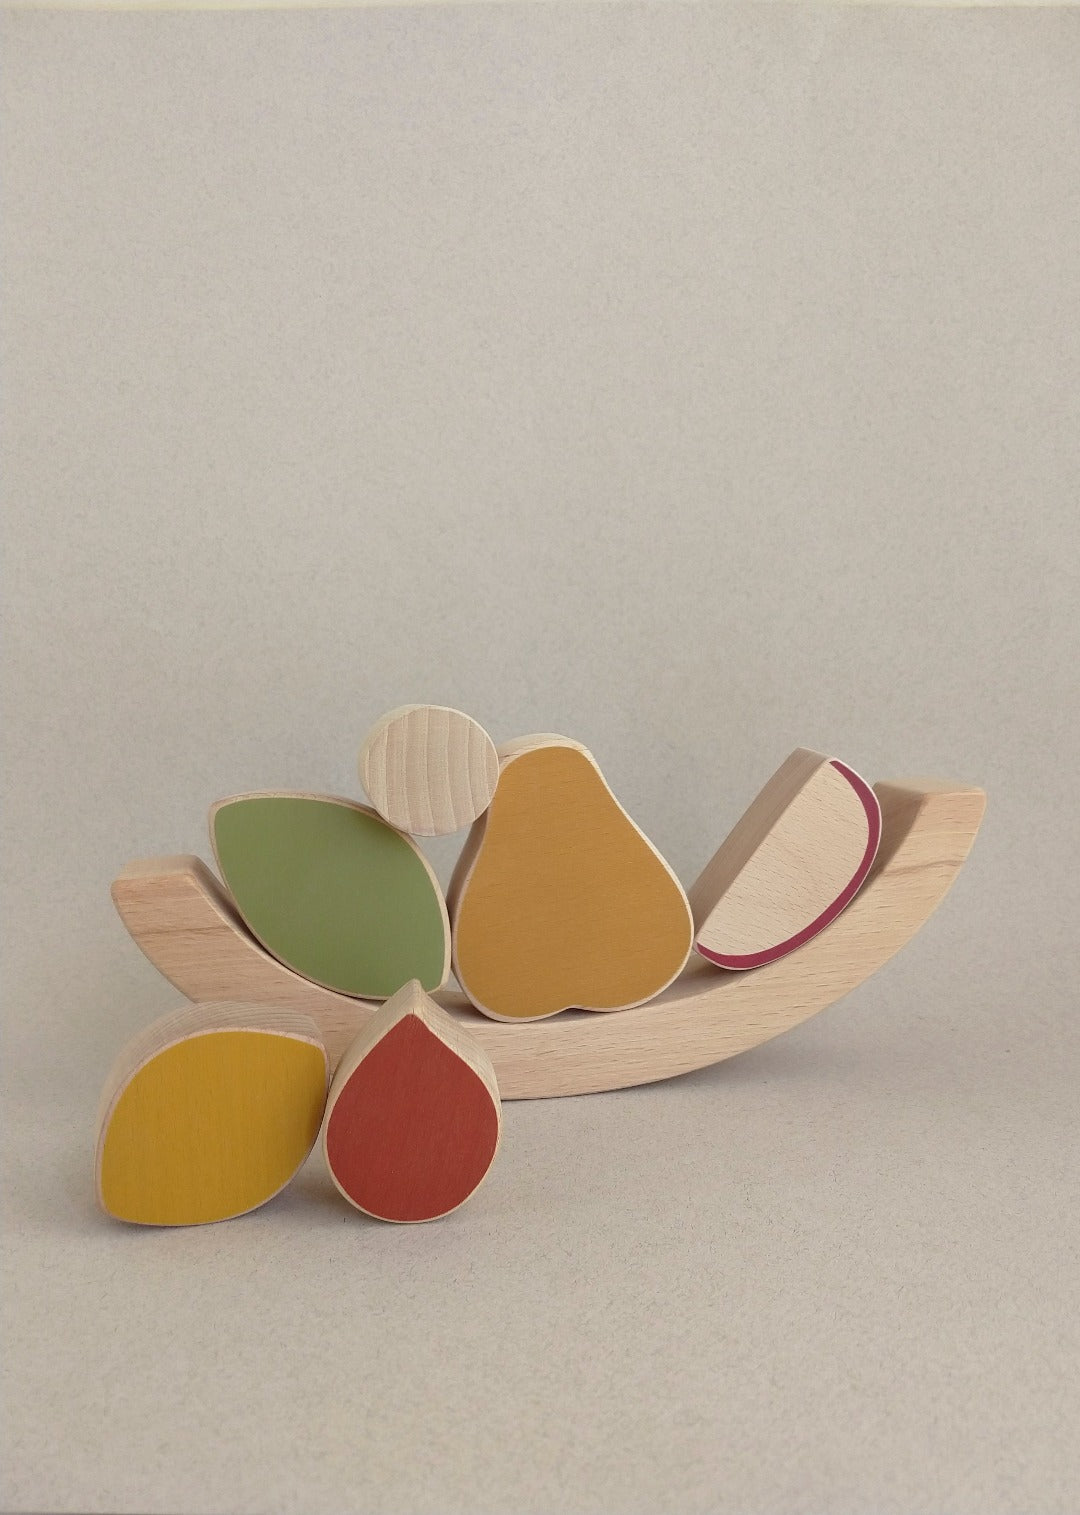 Abstract forms, satin smooth wood surfaces and warm colours invite the child to play while practicing fine motor skills by stacking the wooden fruits, leaves and seeds in the swinging concave form of the basket.